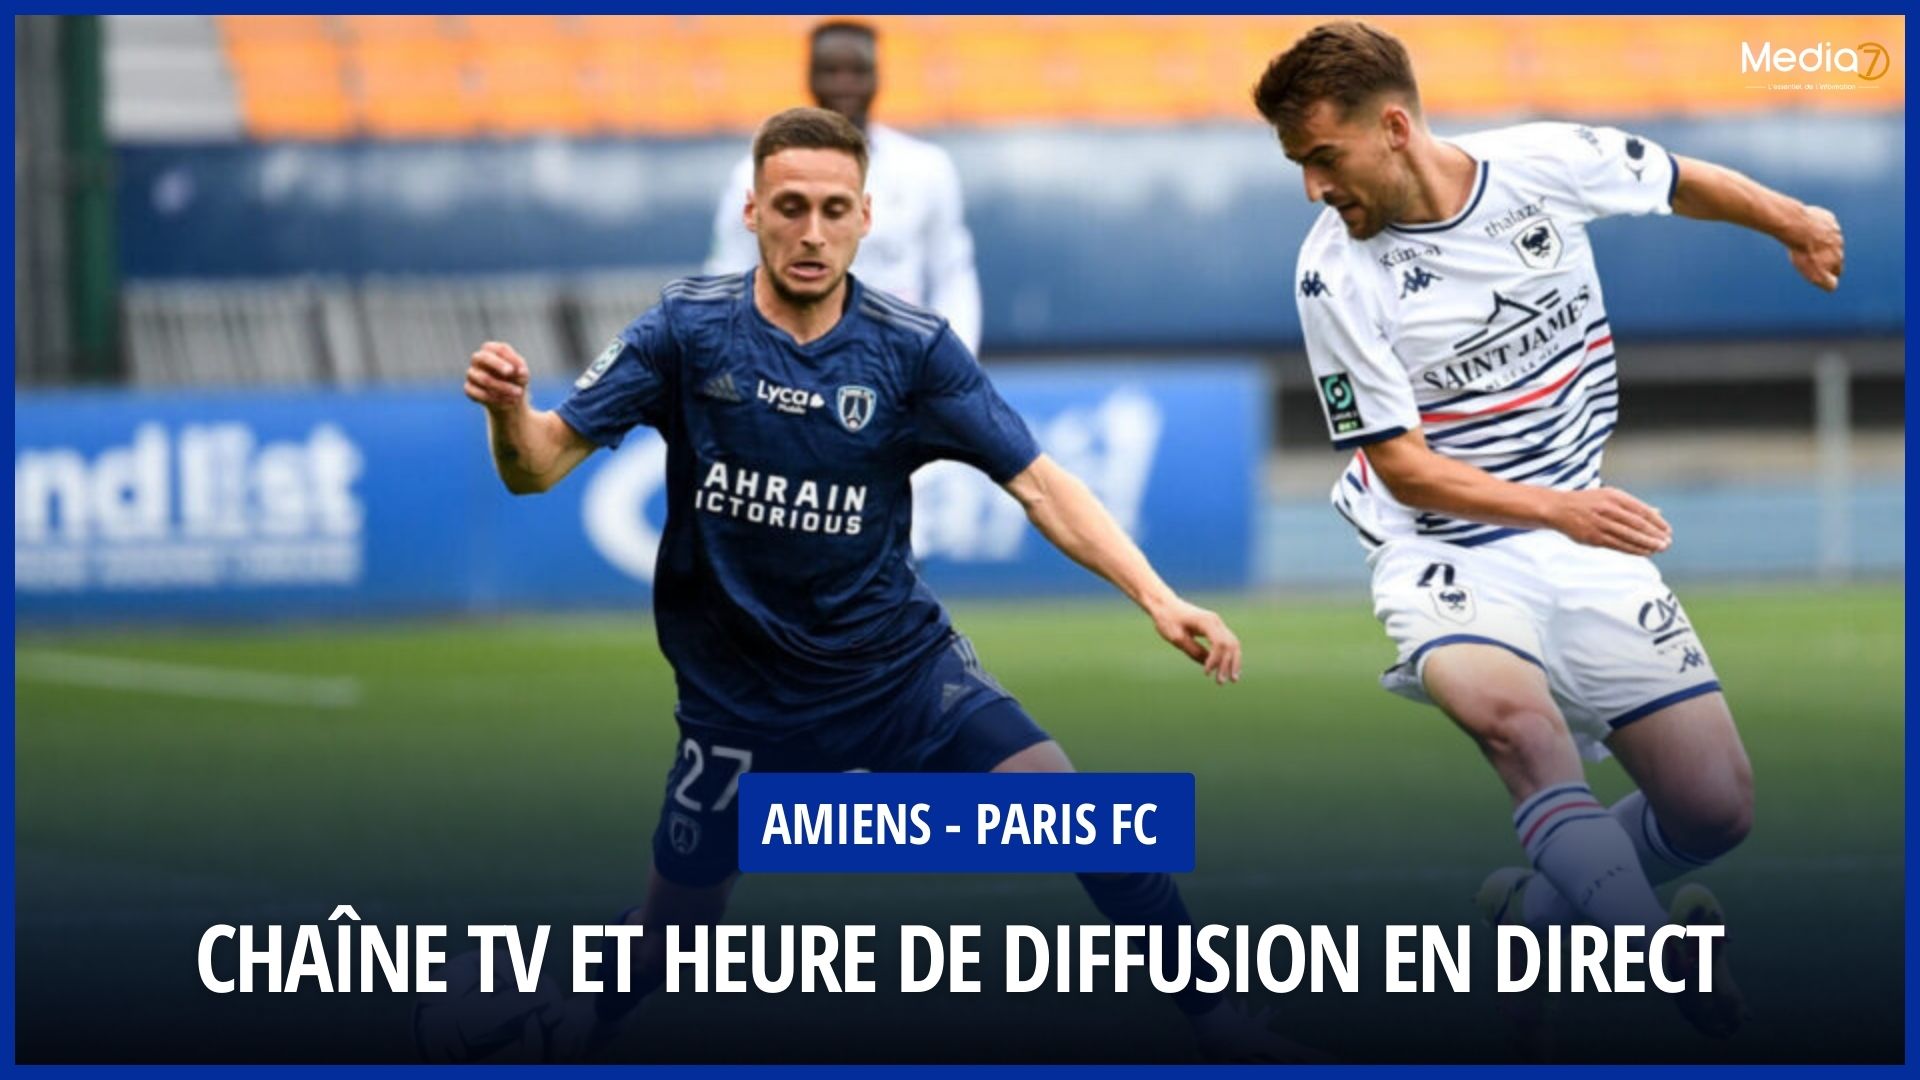 Amiens - Paris FC Match Live: TV Broadcast & Streaming, Schedule and Channel - Media7